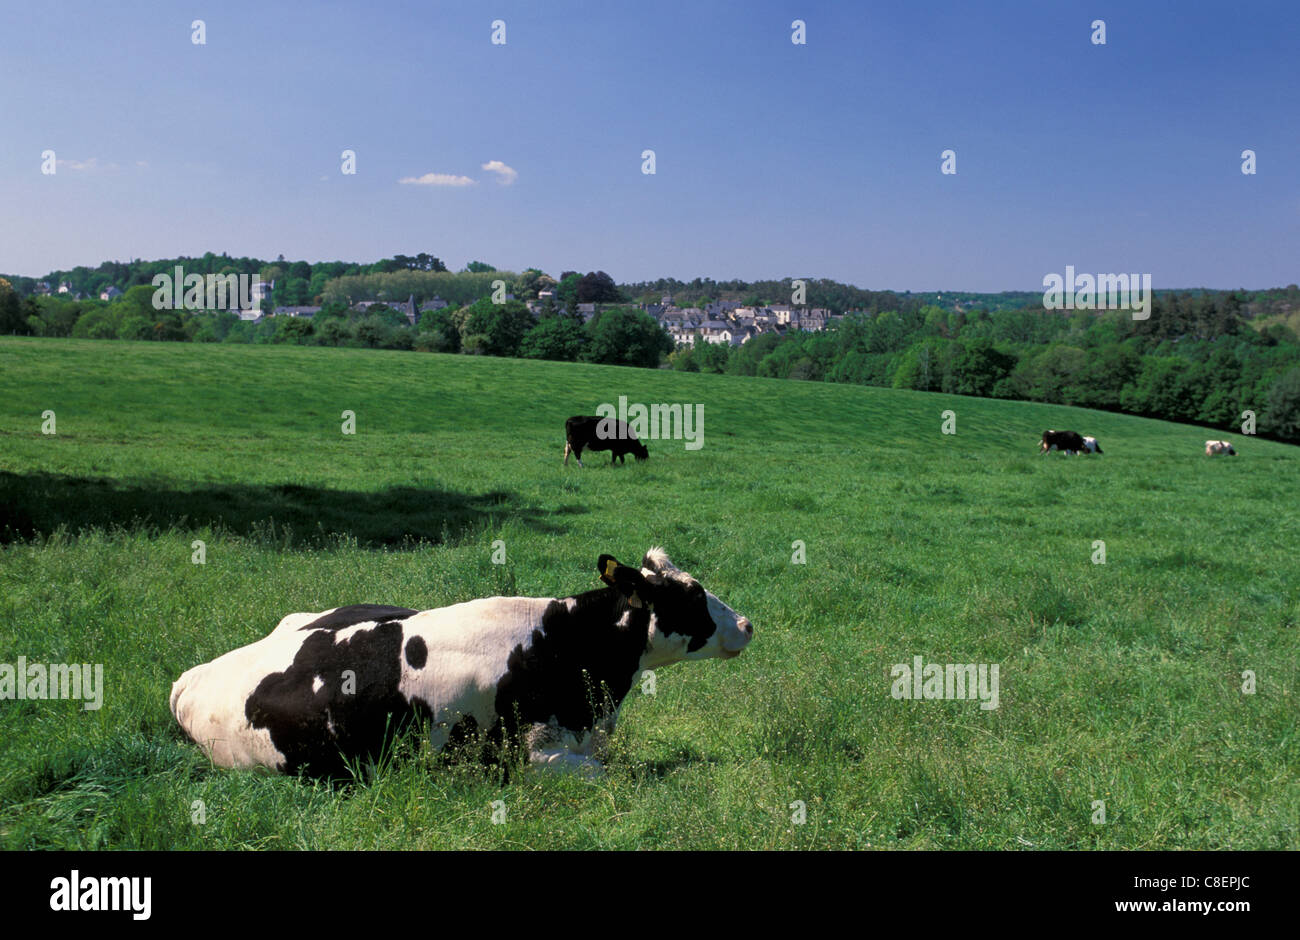 Cows, near Rochefort en terre, Brittany, France, Europe, field, agriculture Stock Photo